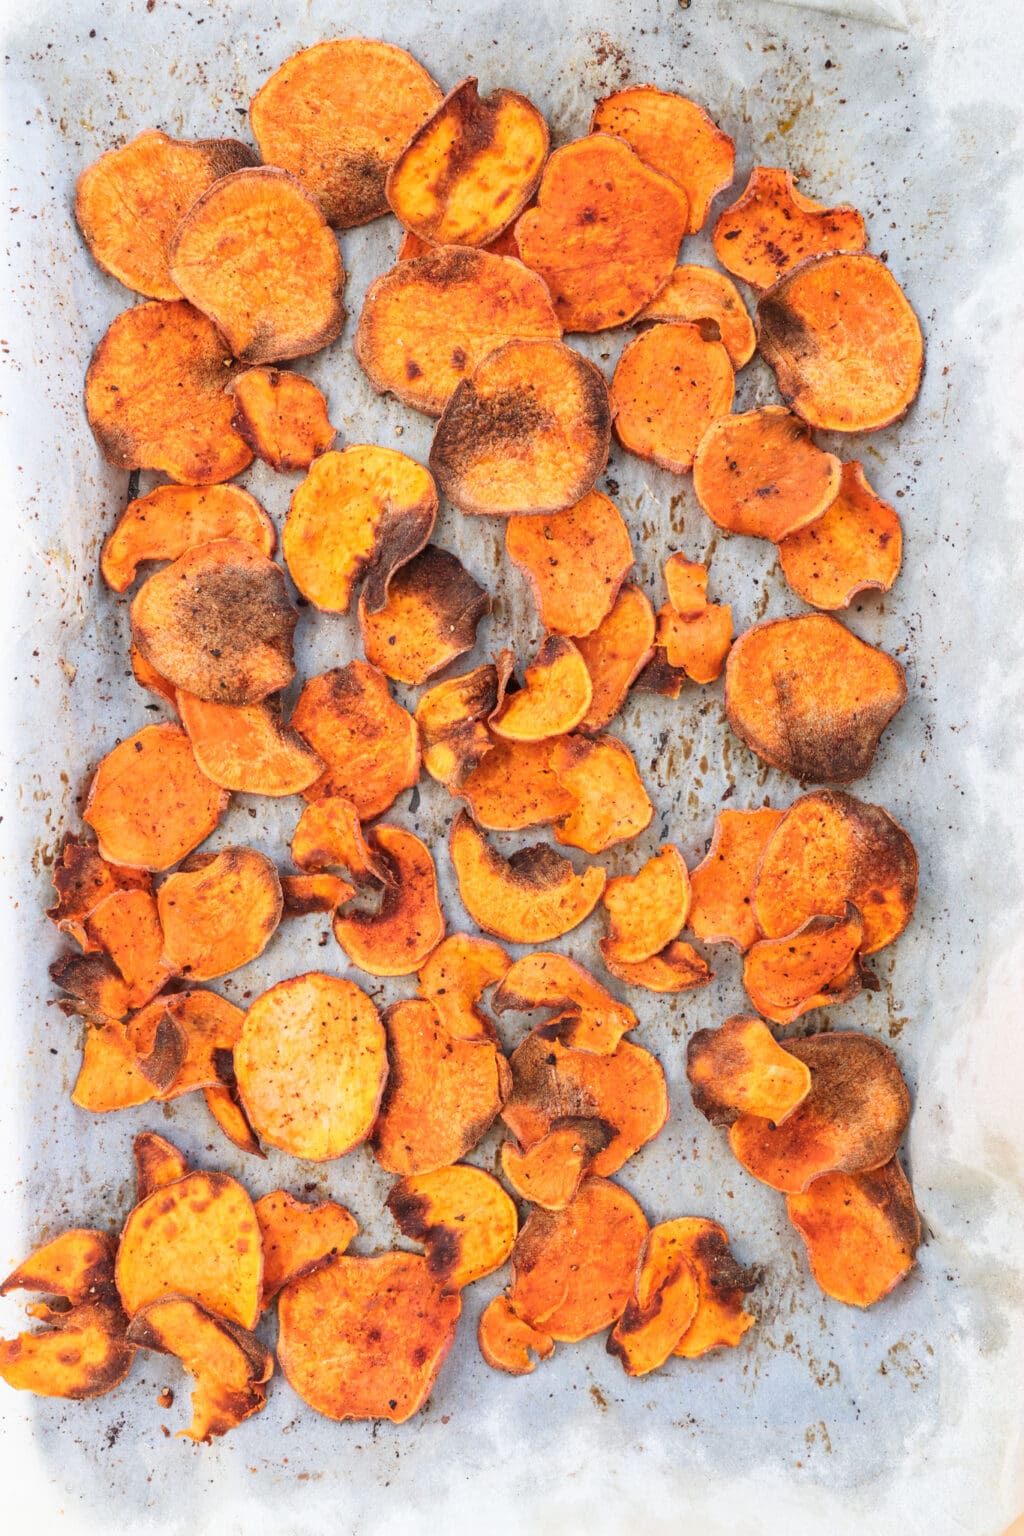 Cooked sweet potato chips on a baking sheet with parchment paper